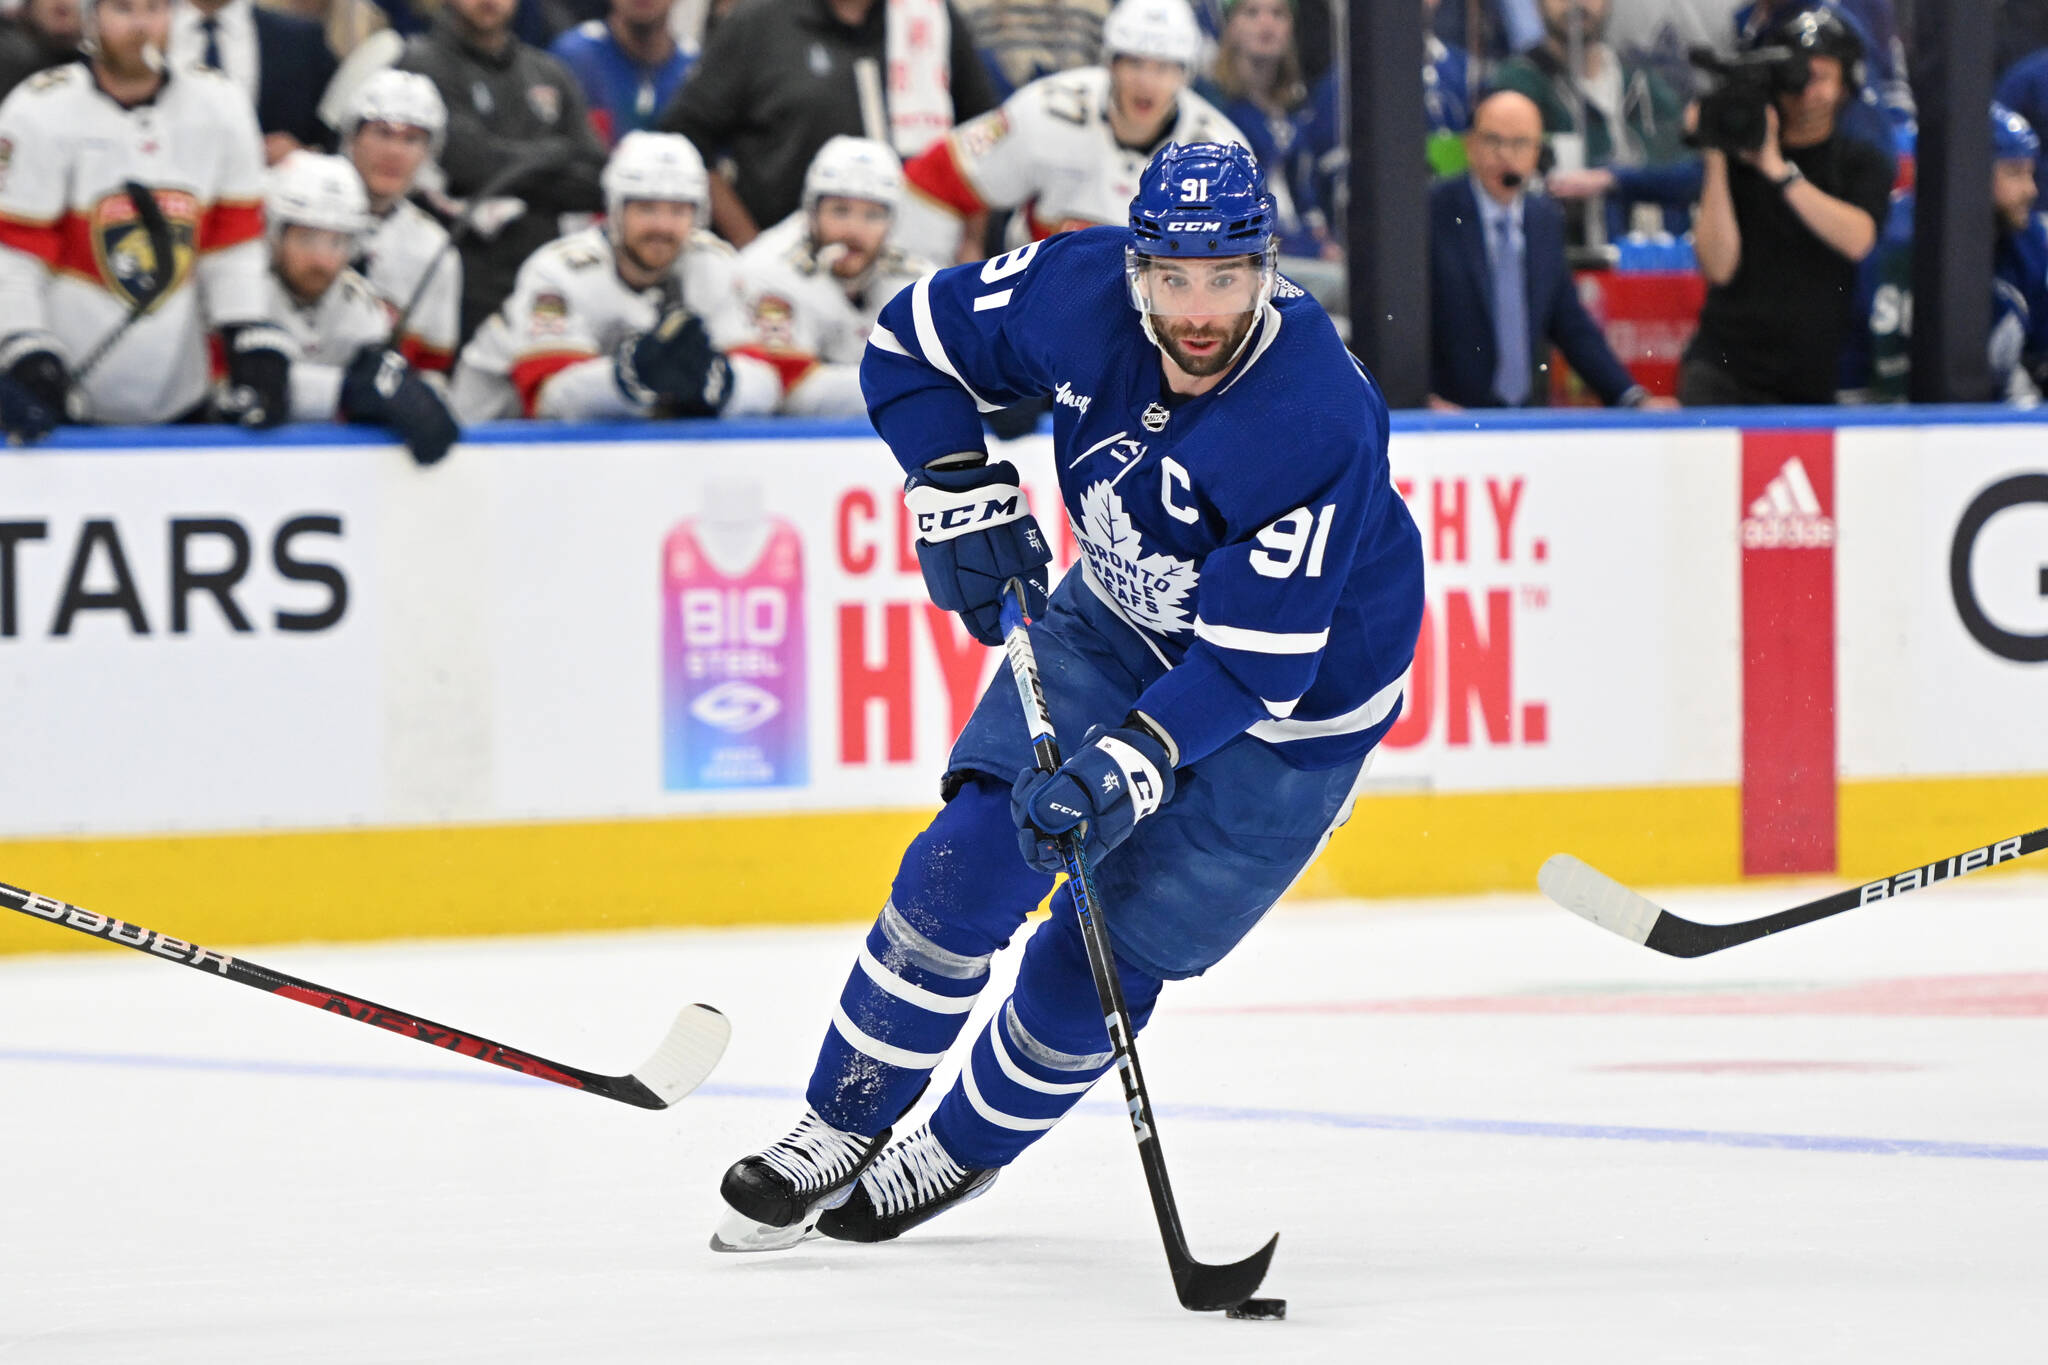 Toronto Maple Leafs: What is going on with John Tavares?